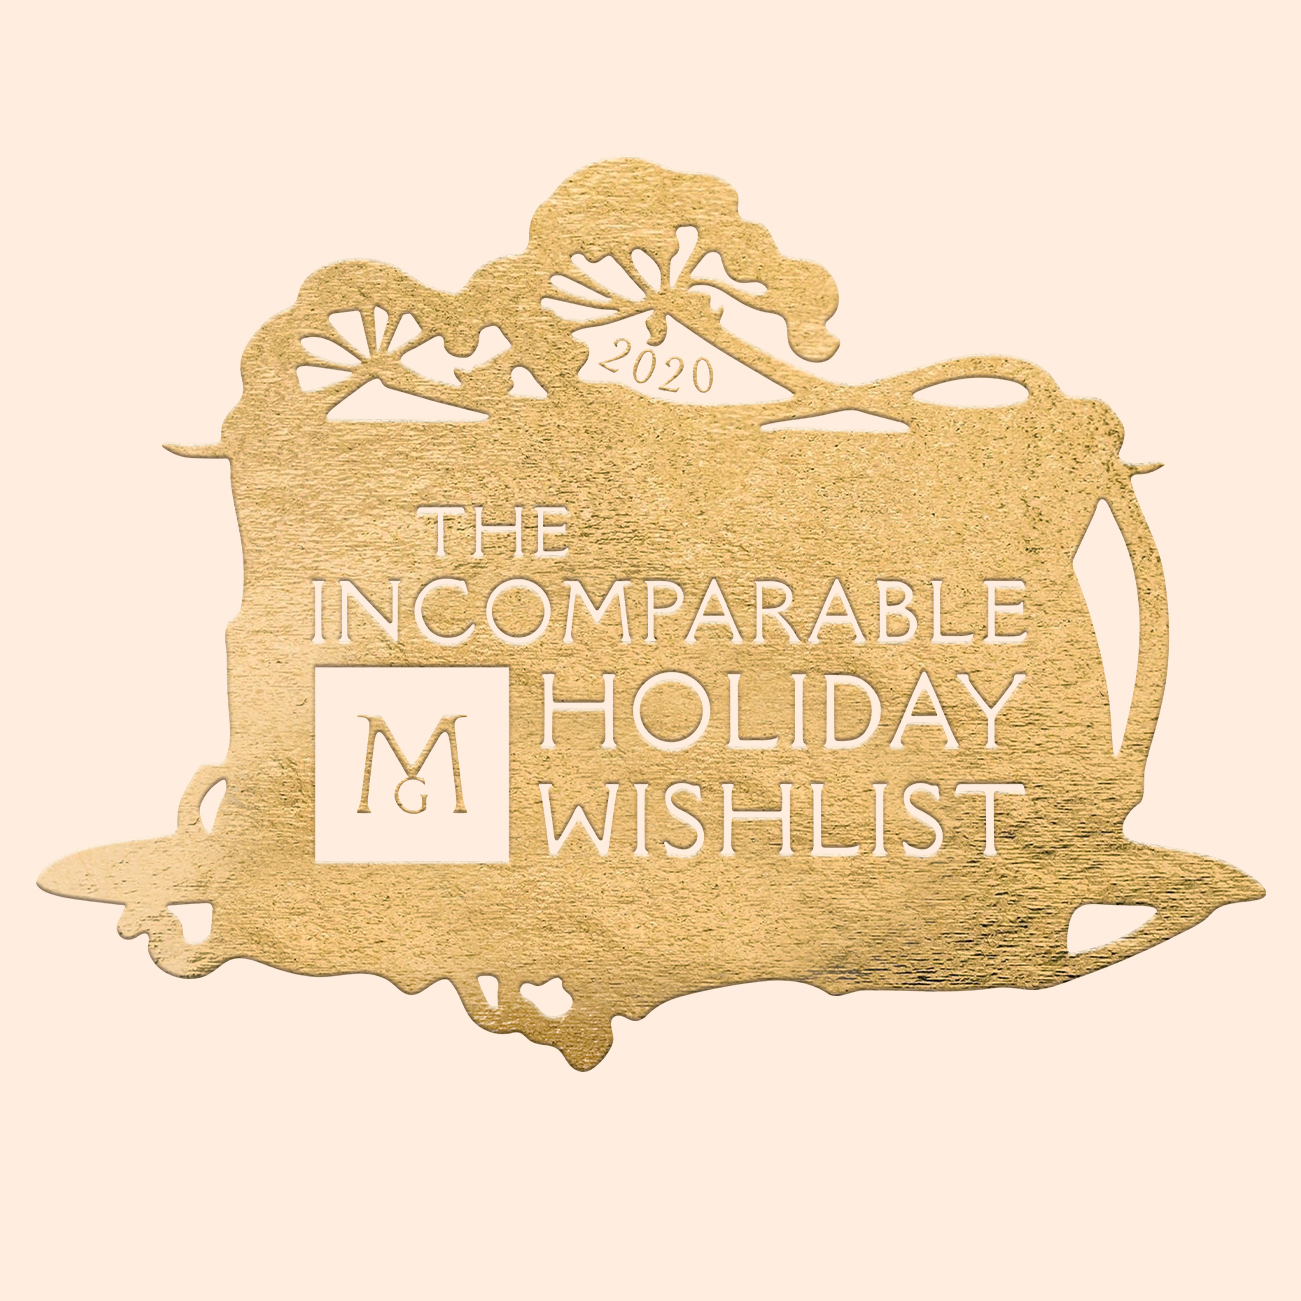 The Incomparable Holiday Wishlist